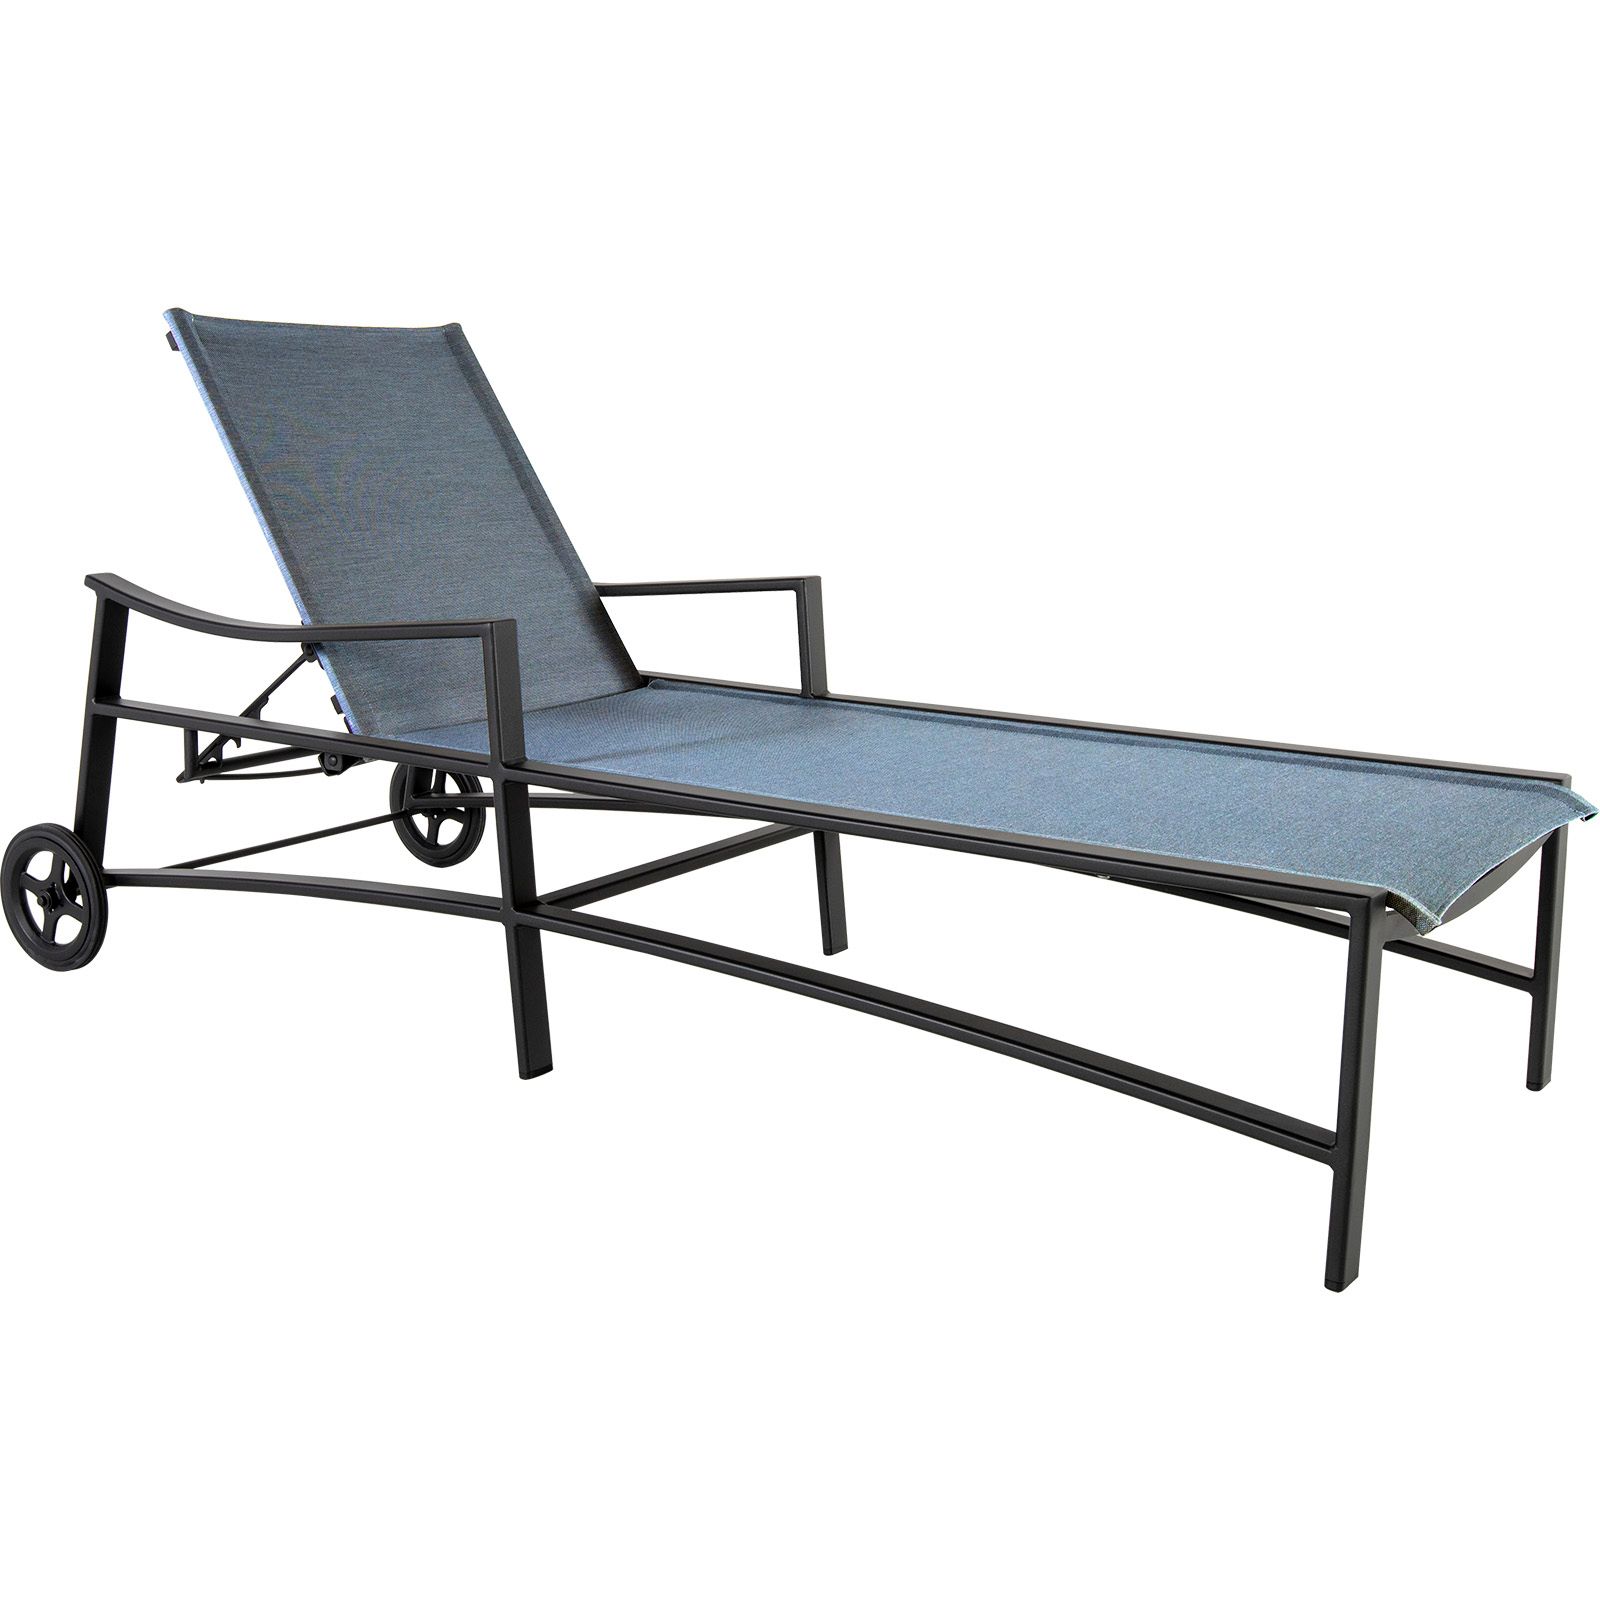 Avana Sling Adjustable Chaise with Wheels